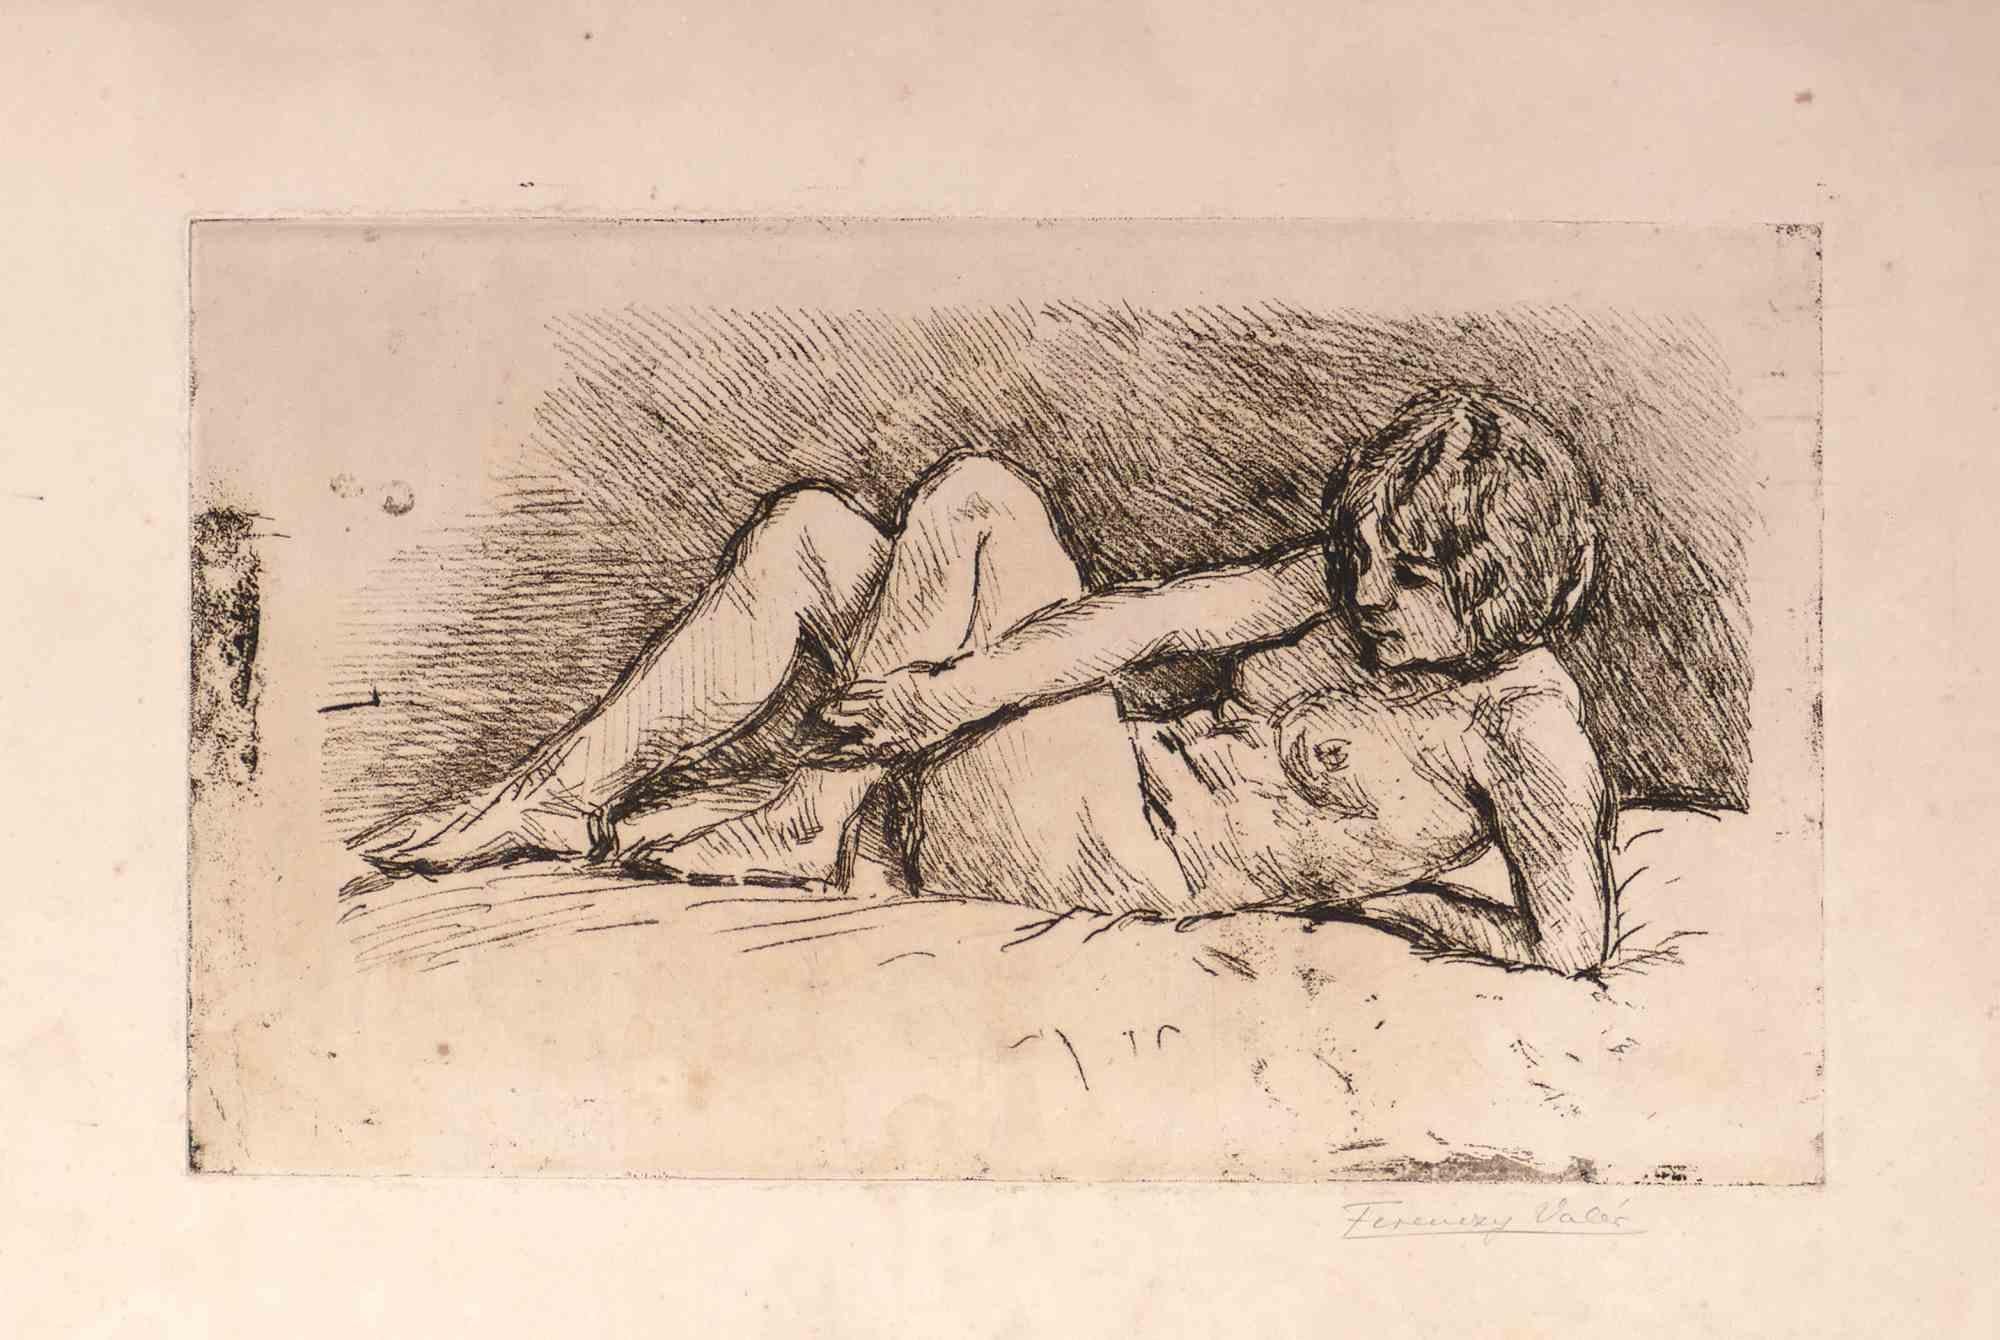 Reclined Nude is an  etching and drypoint on ivory-colored paper realized by Valér Ferenczy in the 1930s.

Hand-signed by pencil on the lower right.

Good conditions with foxing and consumed margin of the paper which do not affect the central